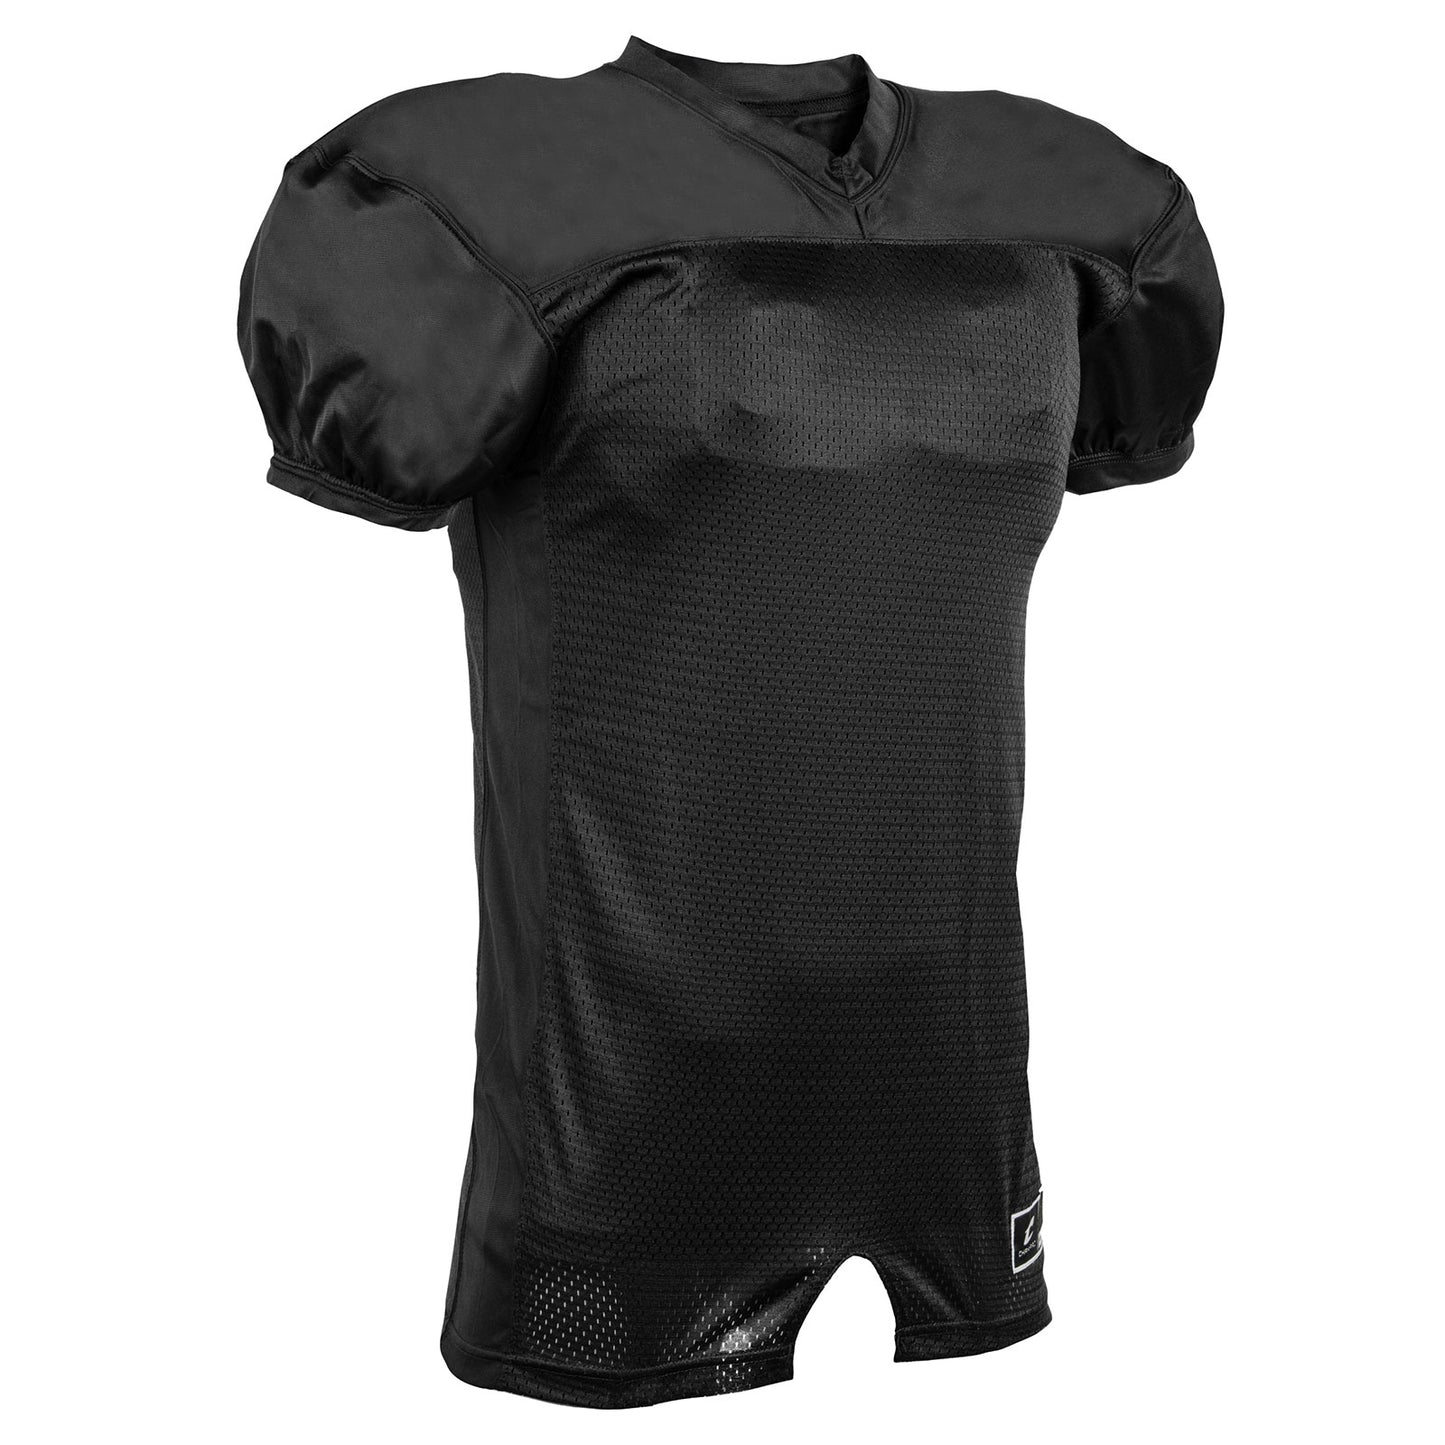 Pro Game Stretch Mesh Solid Football Jersey BLACK BODY